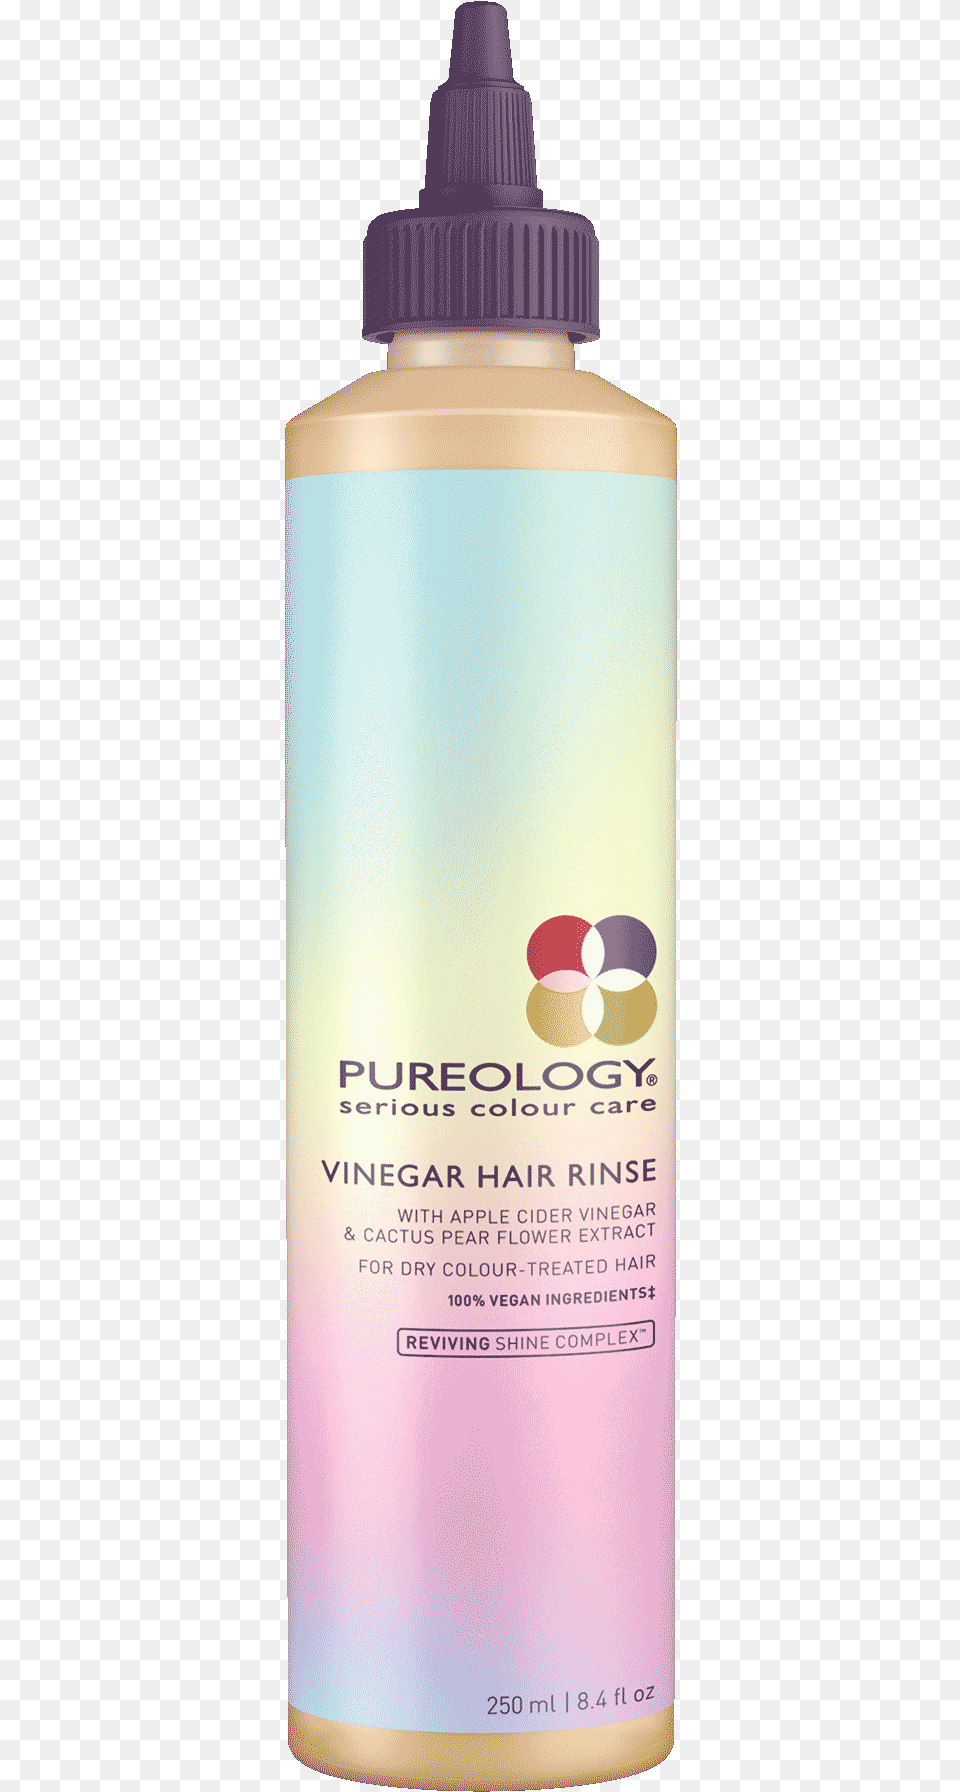 Pureology Vinegar Hair Rinse Made With Apple Cider Pureology, Bottle, Lotion, Cosmetics, Shaker Png